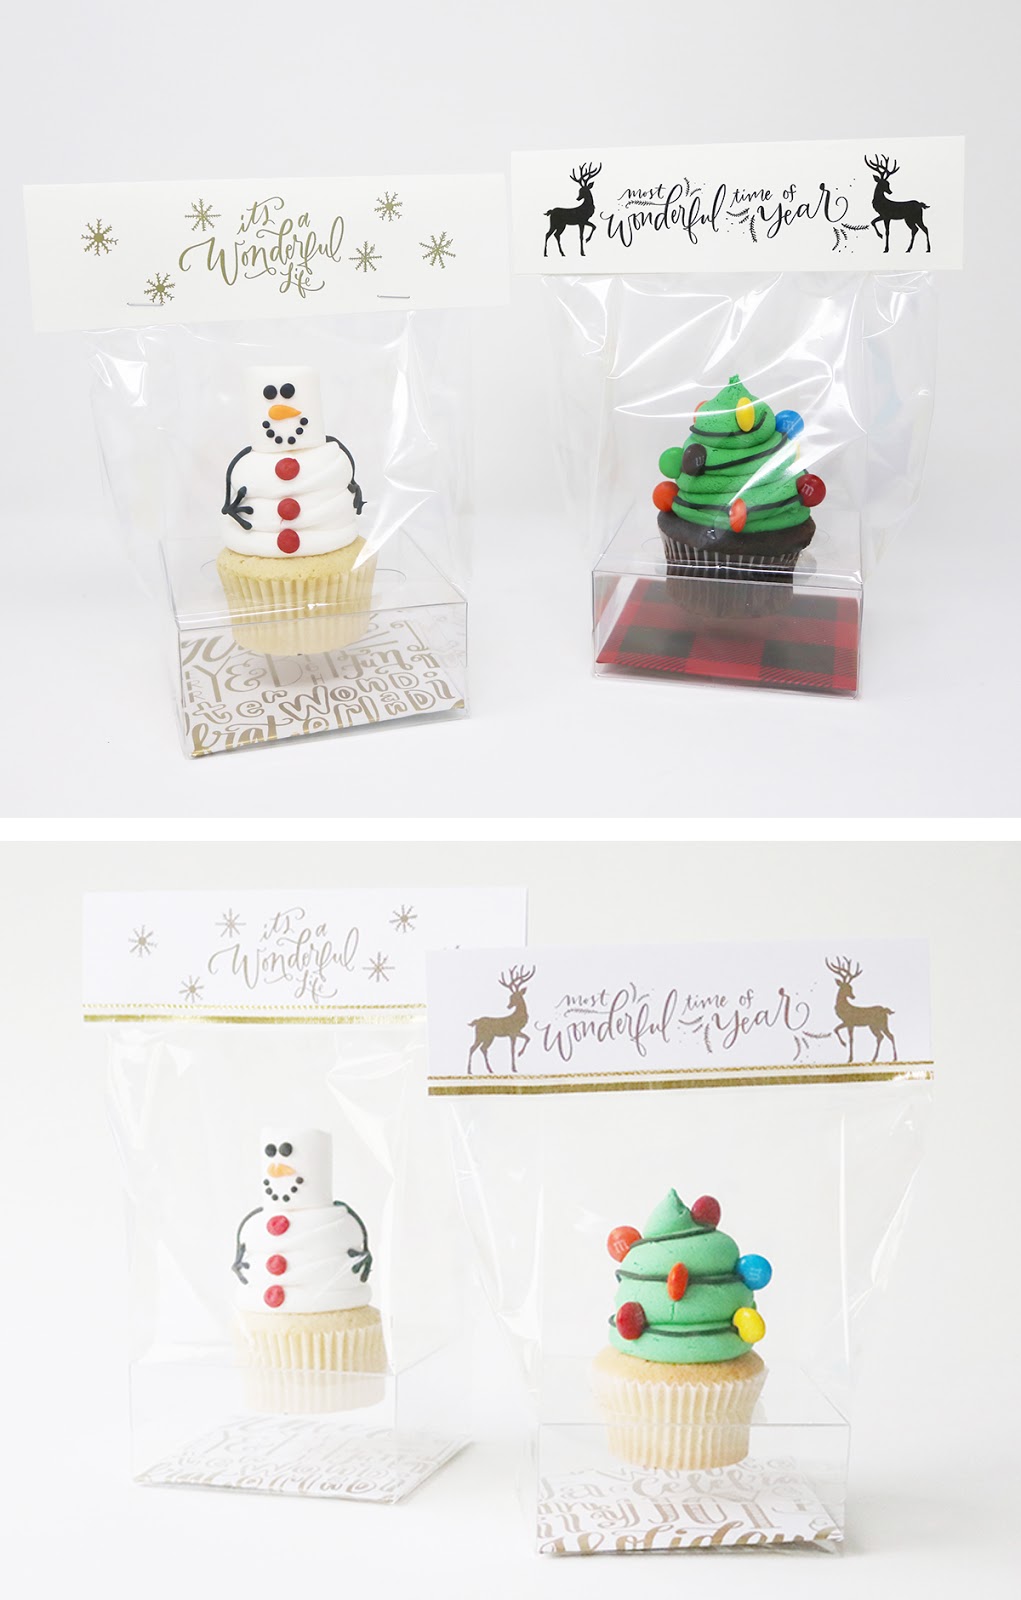 Snowman and Christmas tree cupcakes packaged for gift giving - free download for the gift topper printables | Creative Bag and Bake Sale Toronto